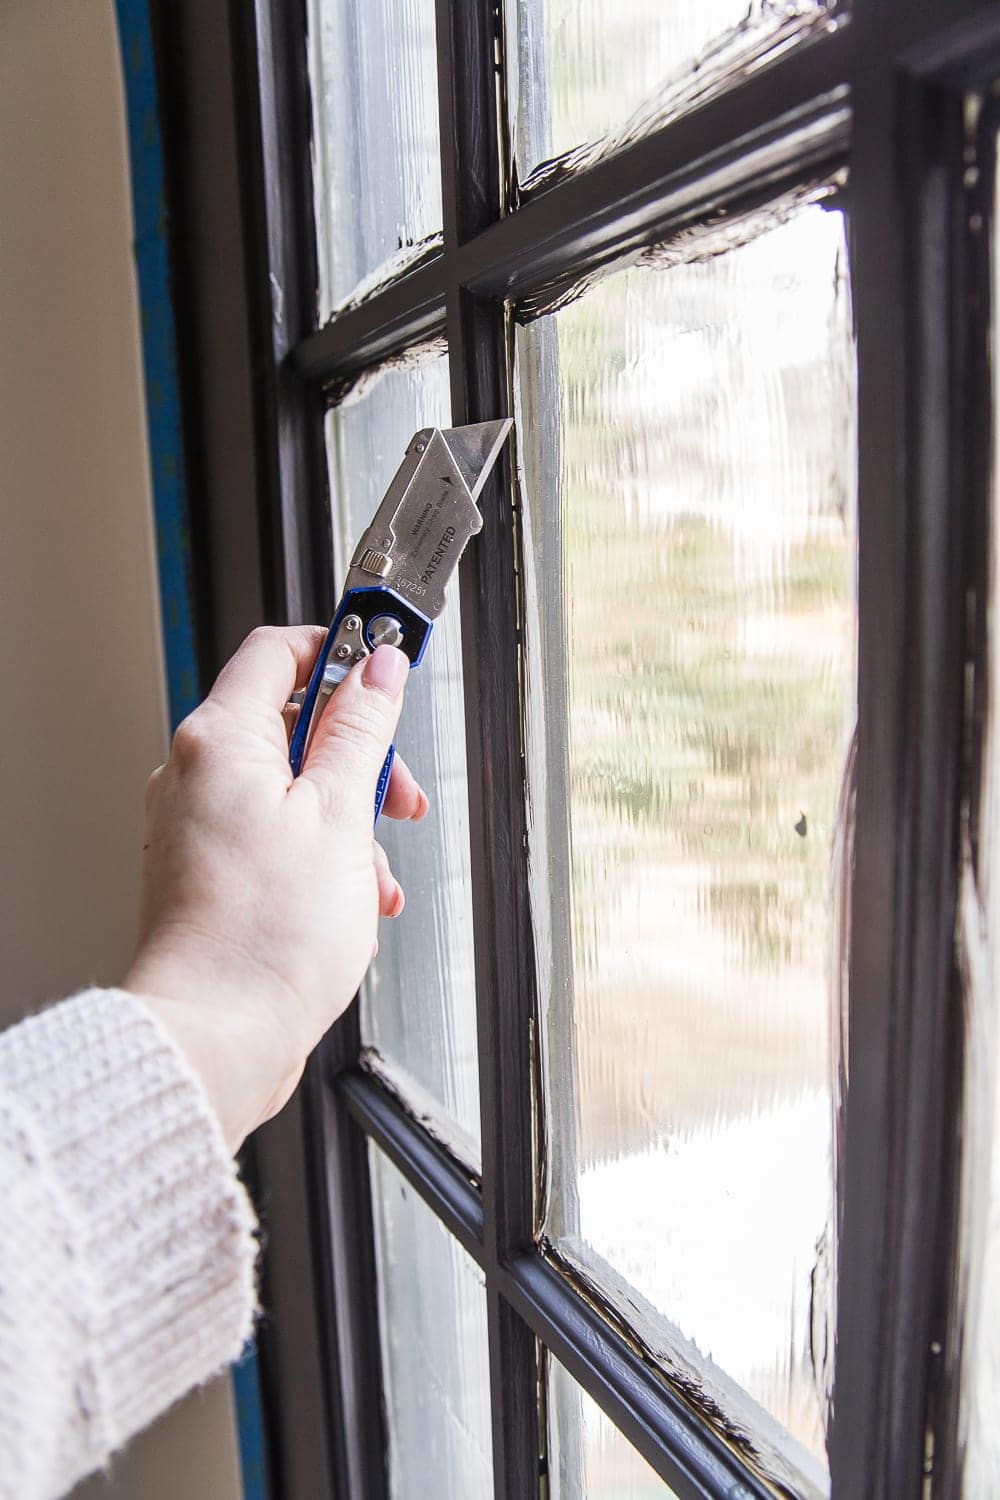 cutting masking liquid away from a french door window pane